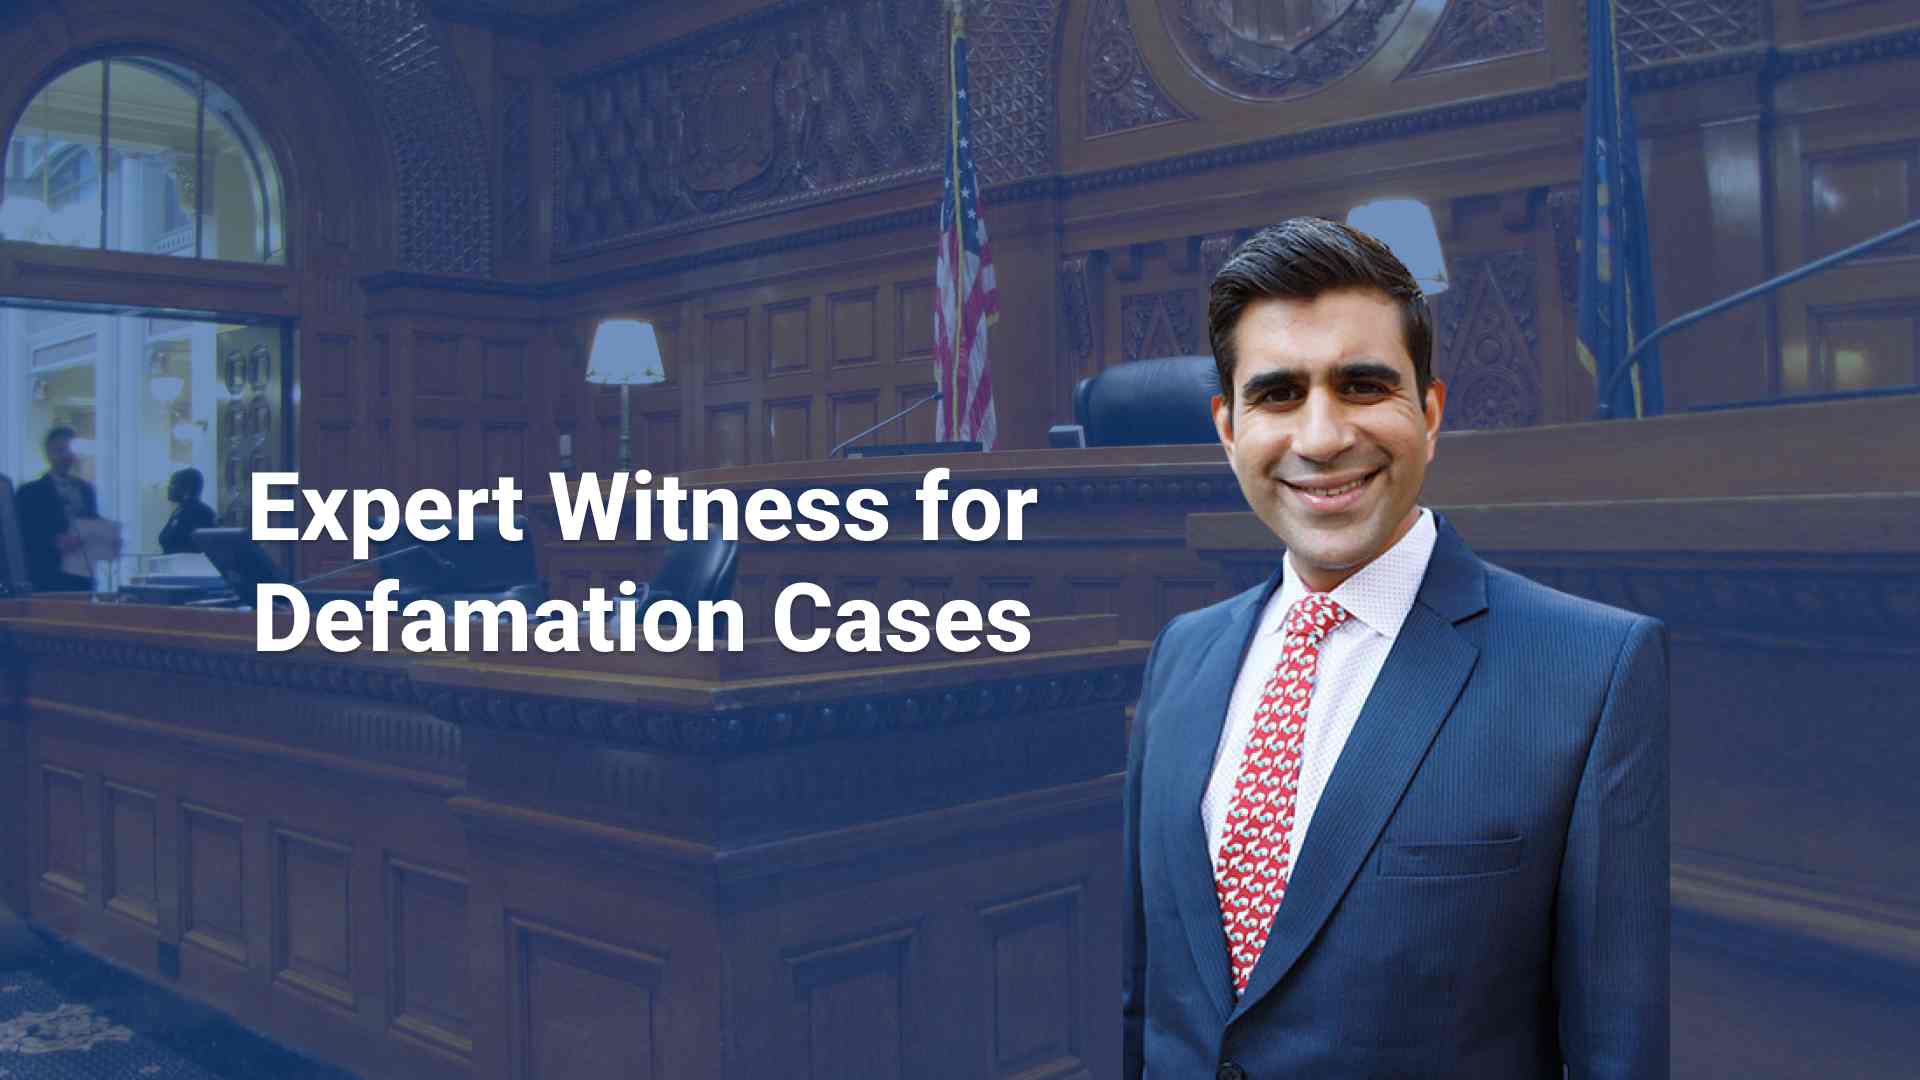 Internet Defamation: How an Expert Witness Can Protect You in Court